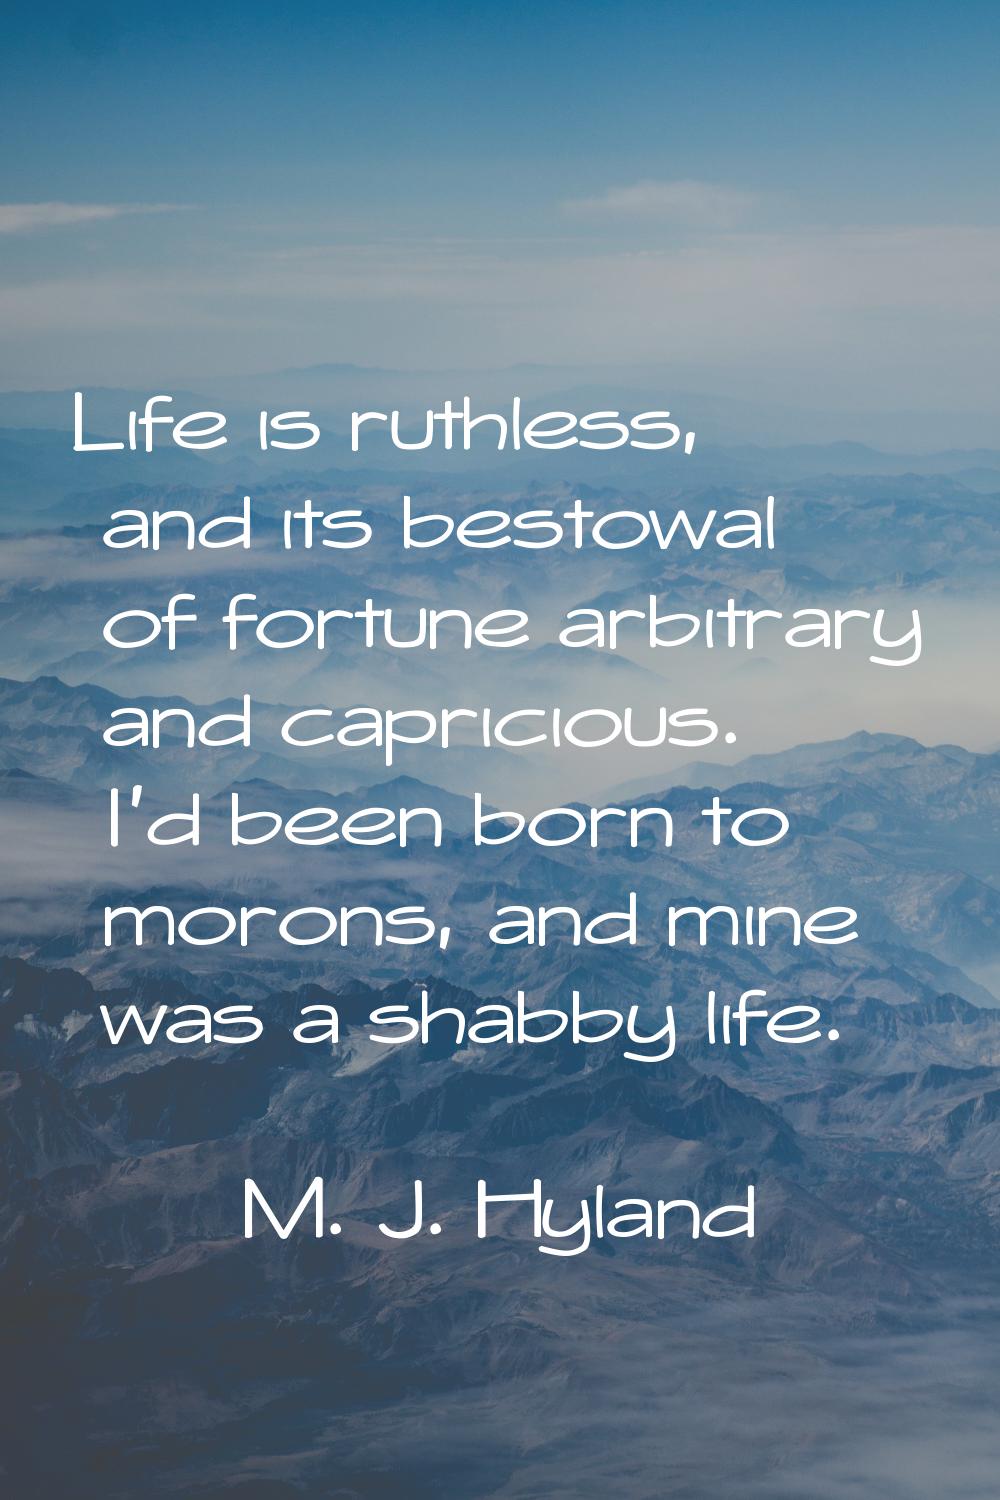 Life is ruthless, and its bestowal of fortune arbitrary and capricious. I'd been born to morons, an